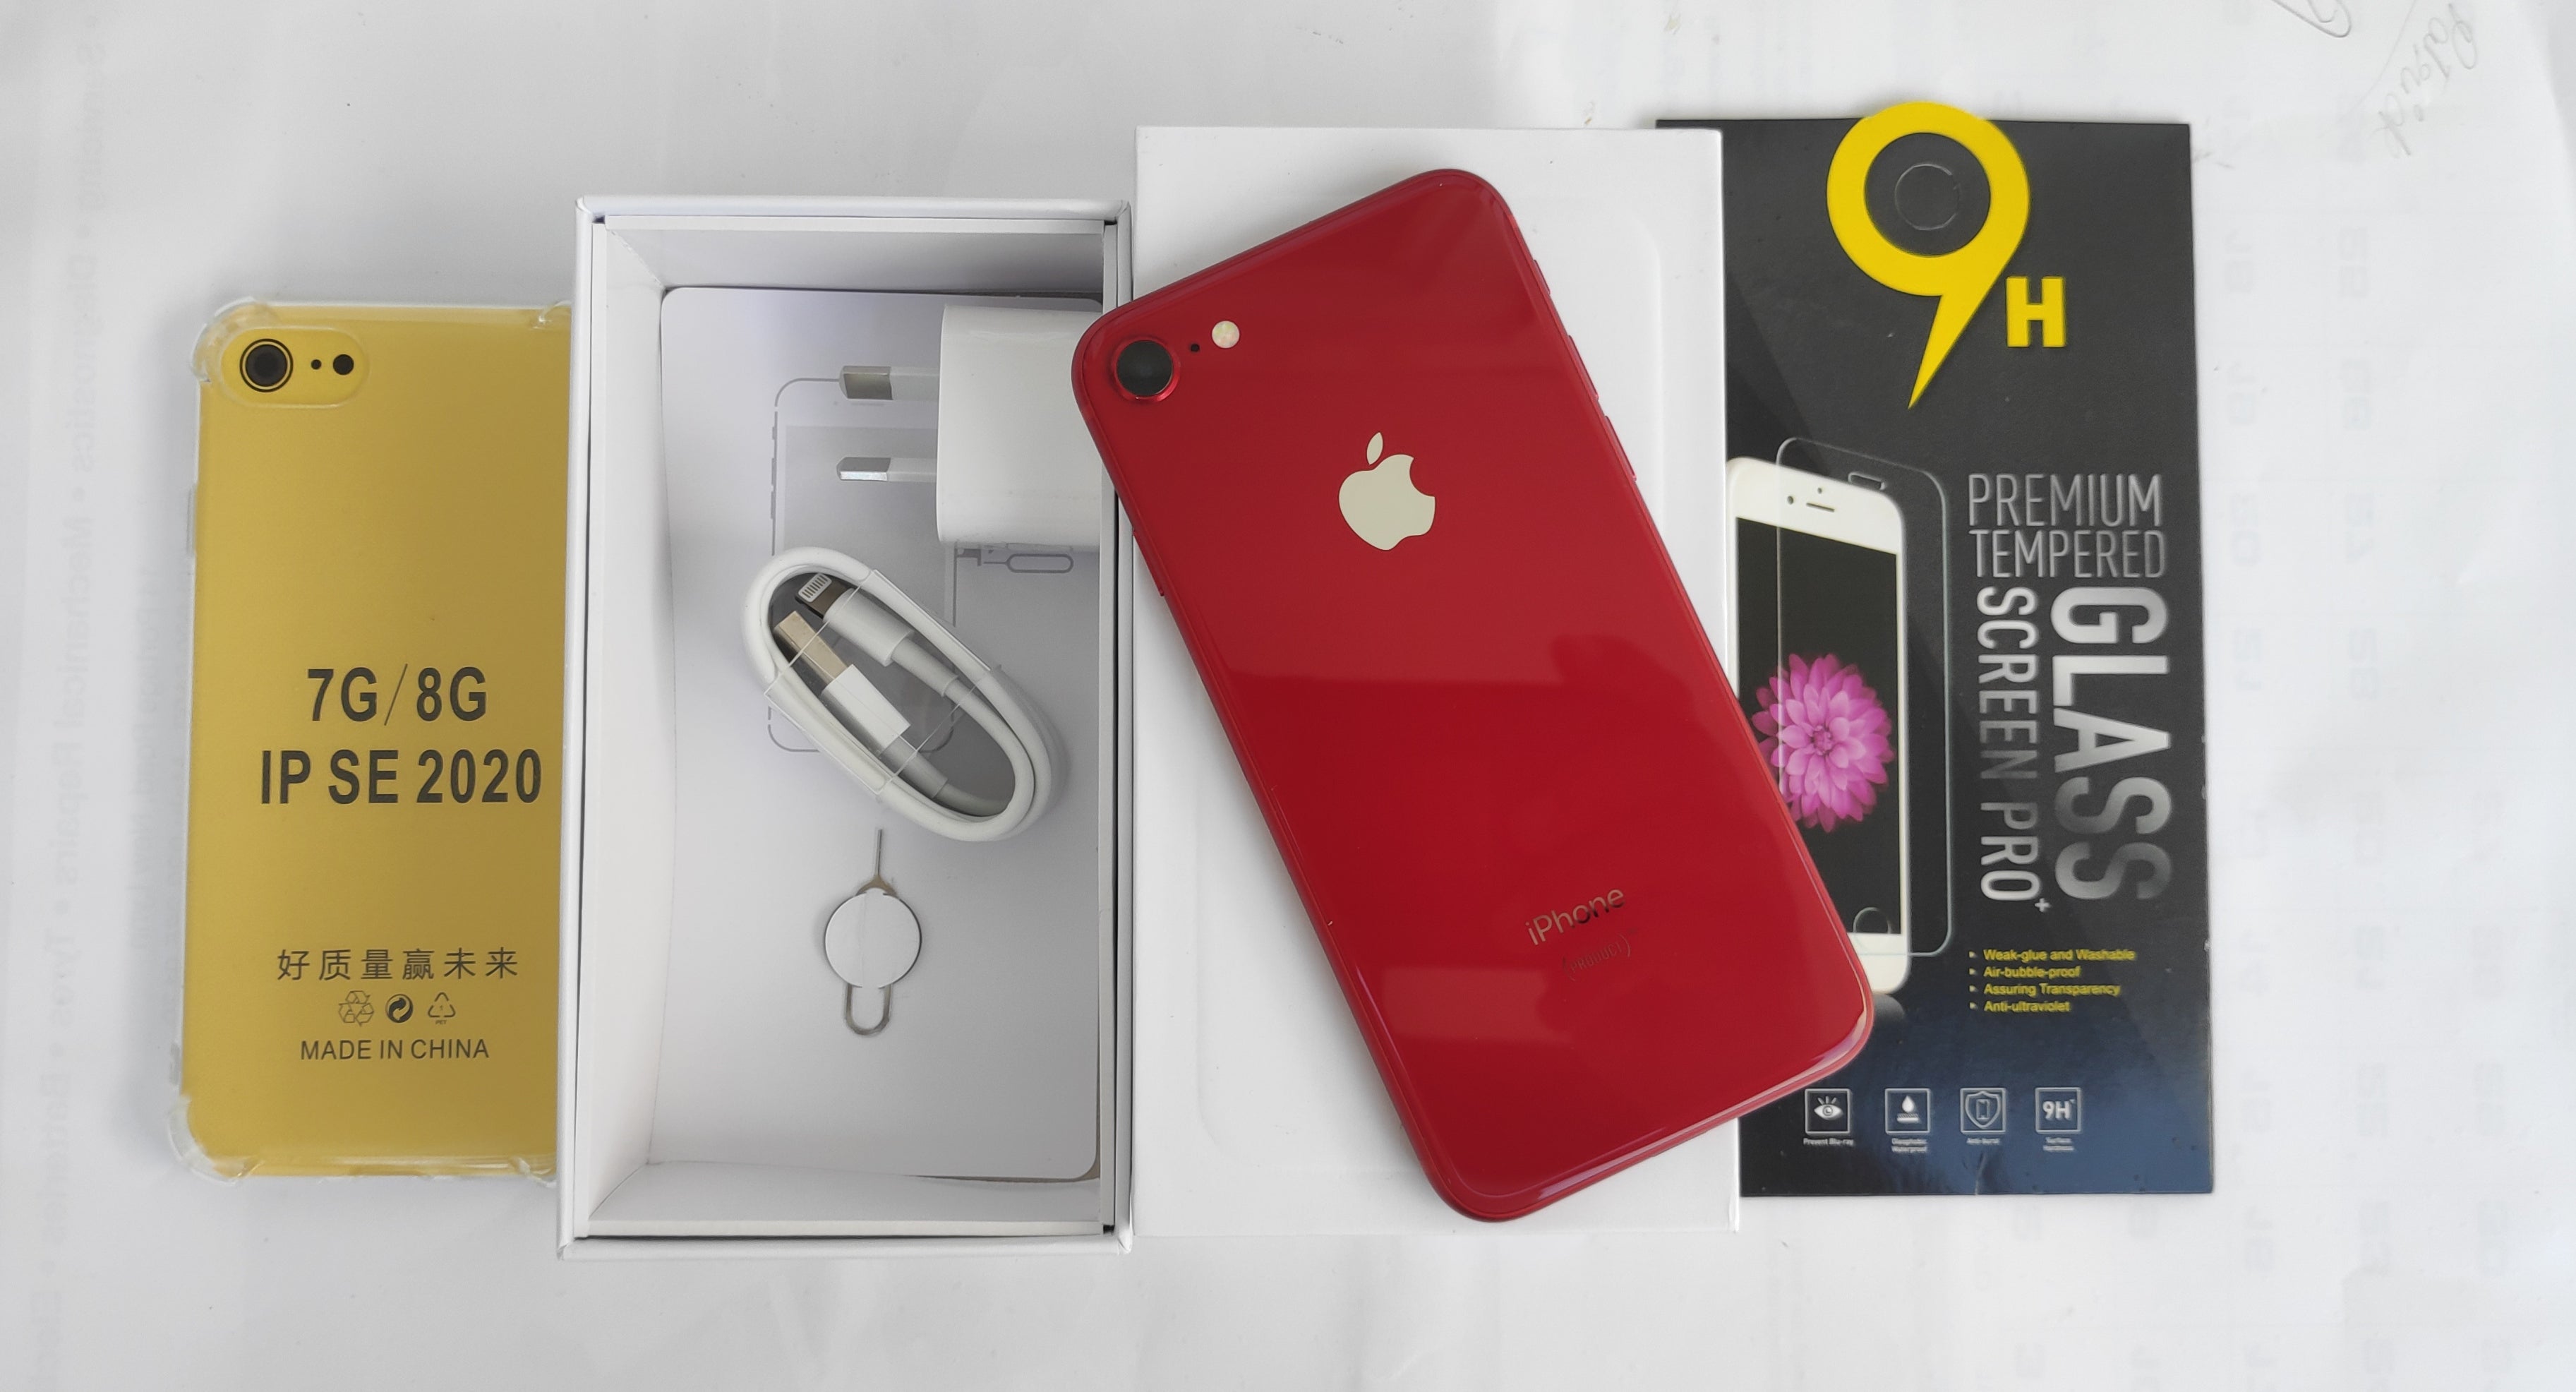 Apple iPhone 8 64GB Red - New Battery, Case, Screen Protector & Shipping (As New)